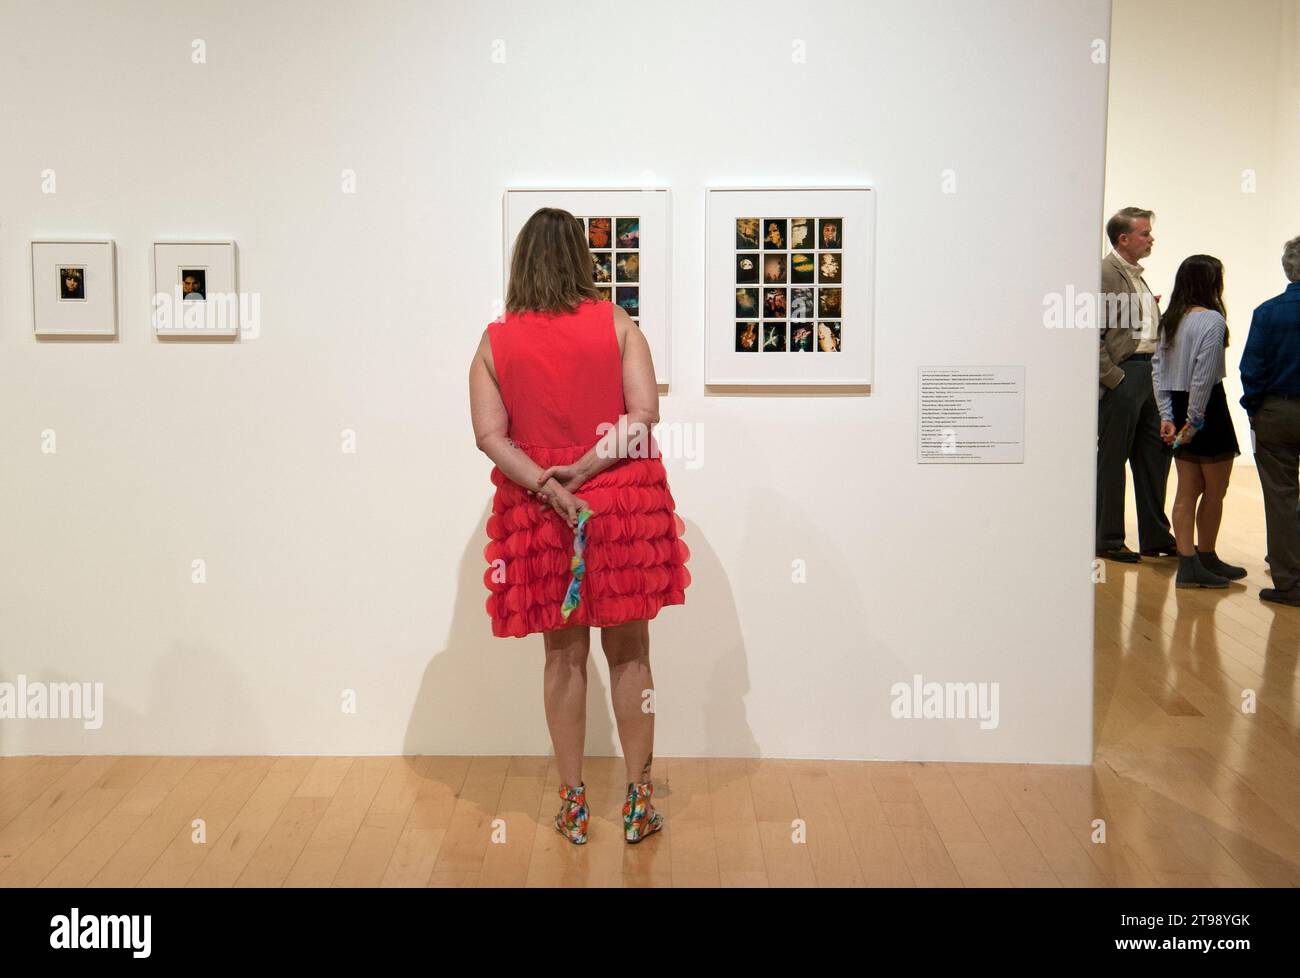 A woman dressed in retro 1960s style for the opening of Kali, Artographer, exhibition, Palm Springs, art, museum, California, USA Stock Photo